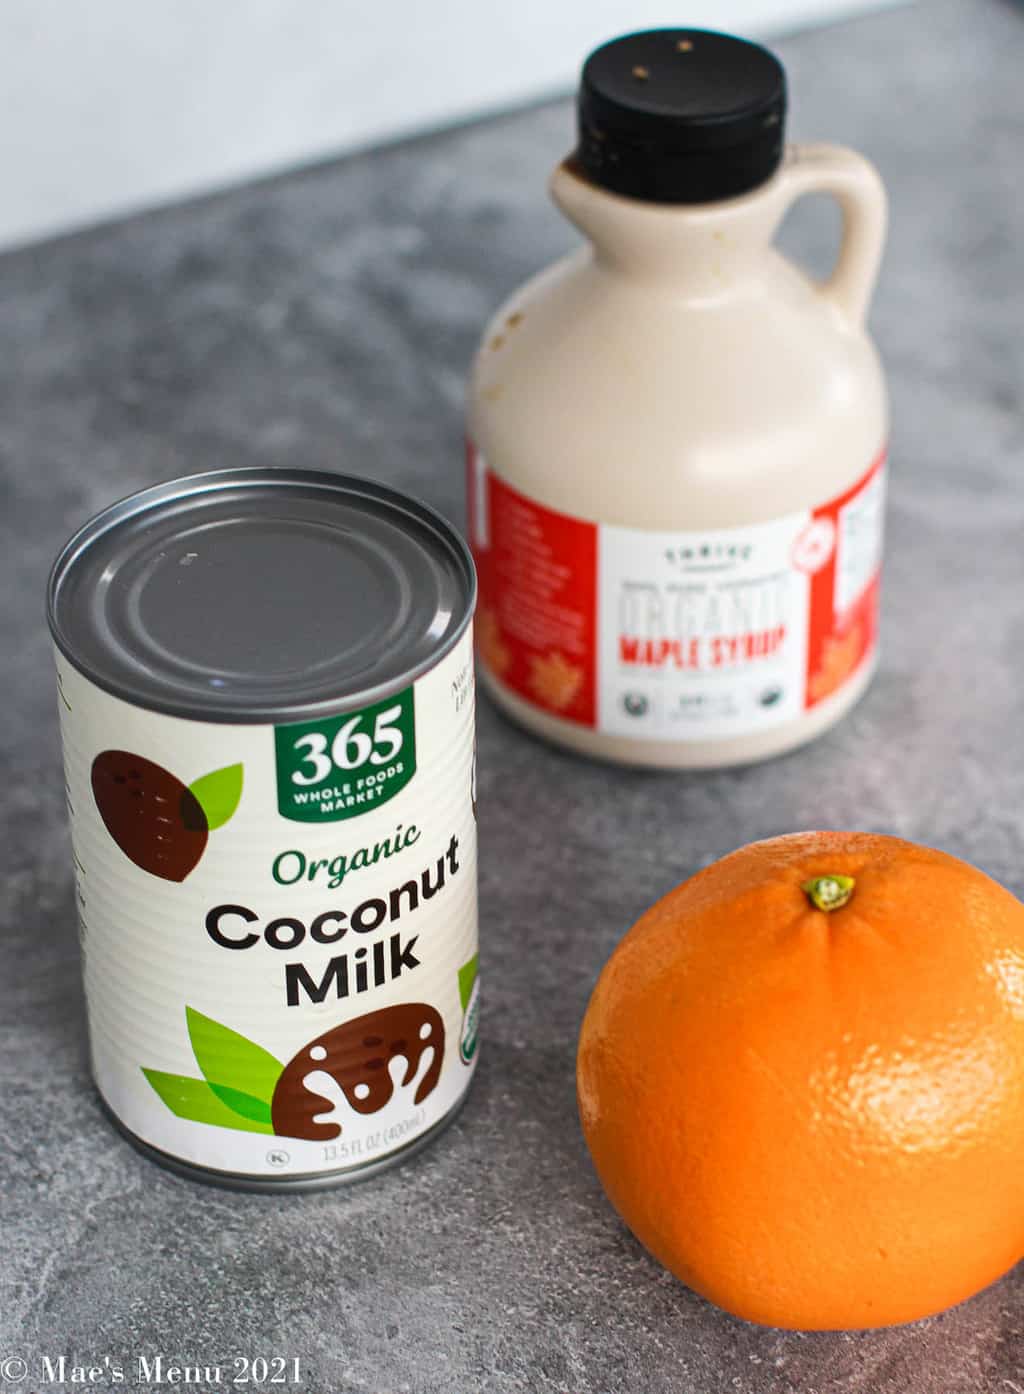 Ingredients for healthy sweet potato souffle: coconut mik, maple syrup, and an orange